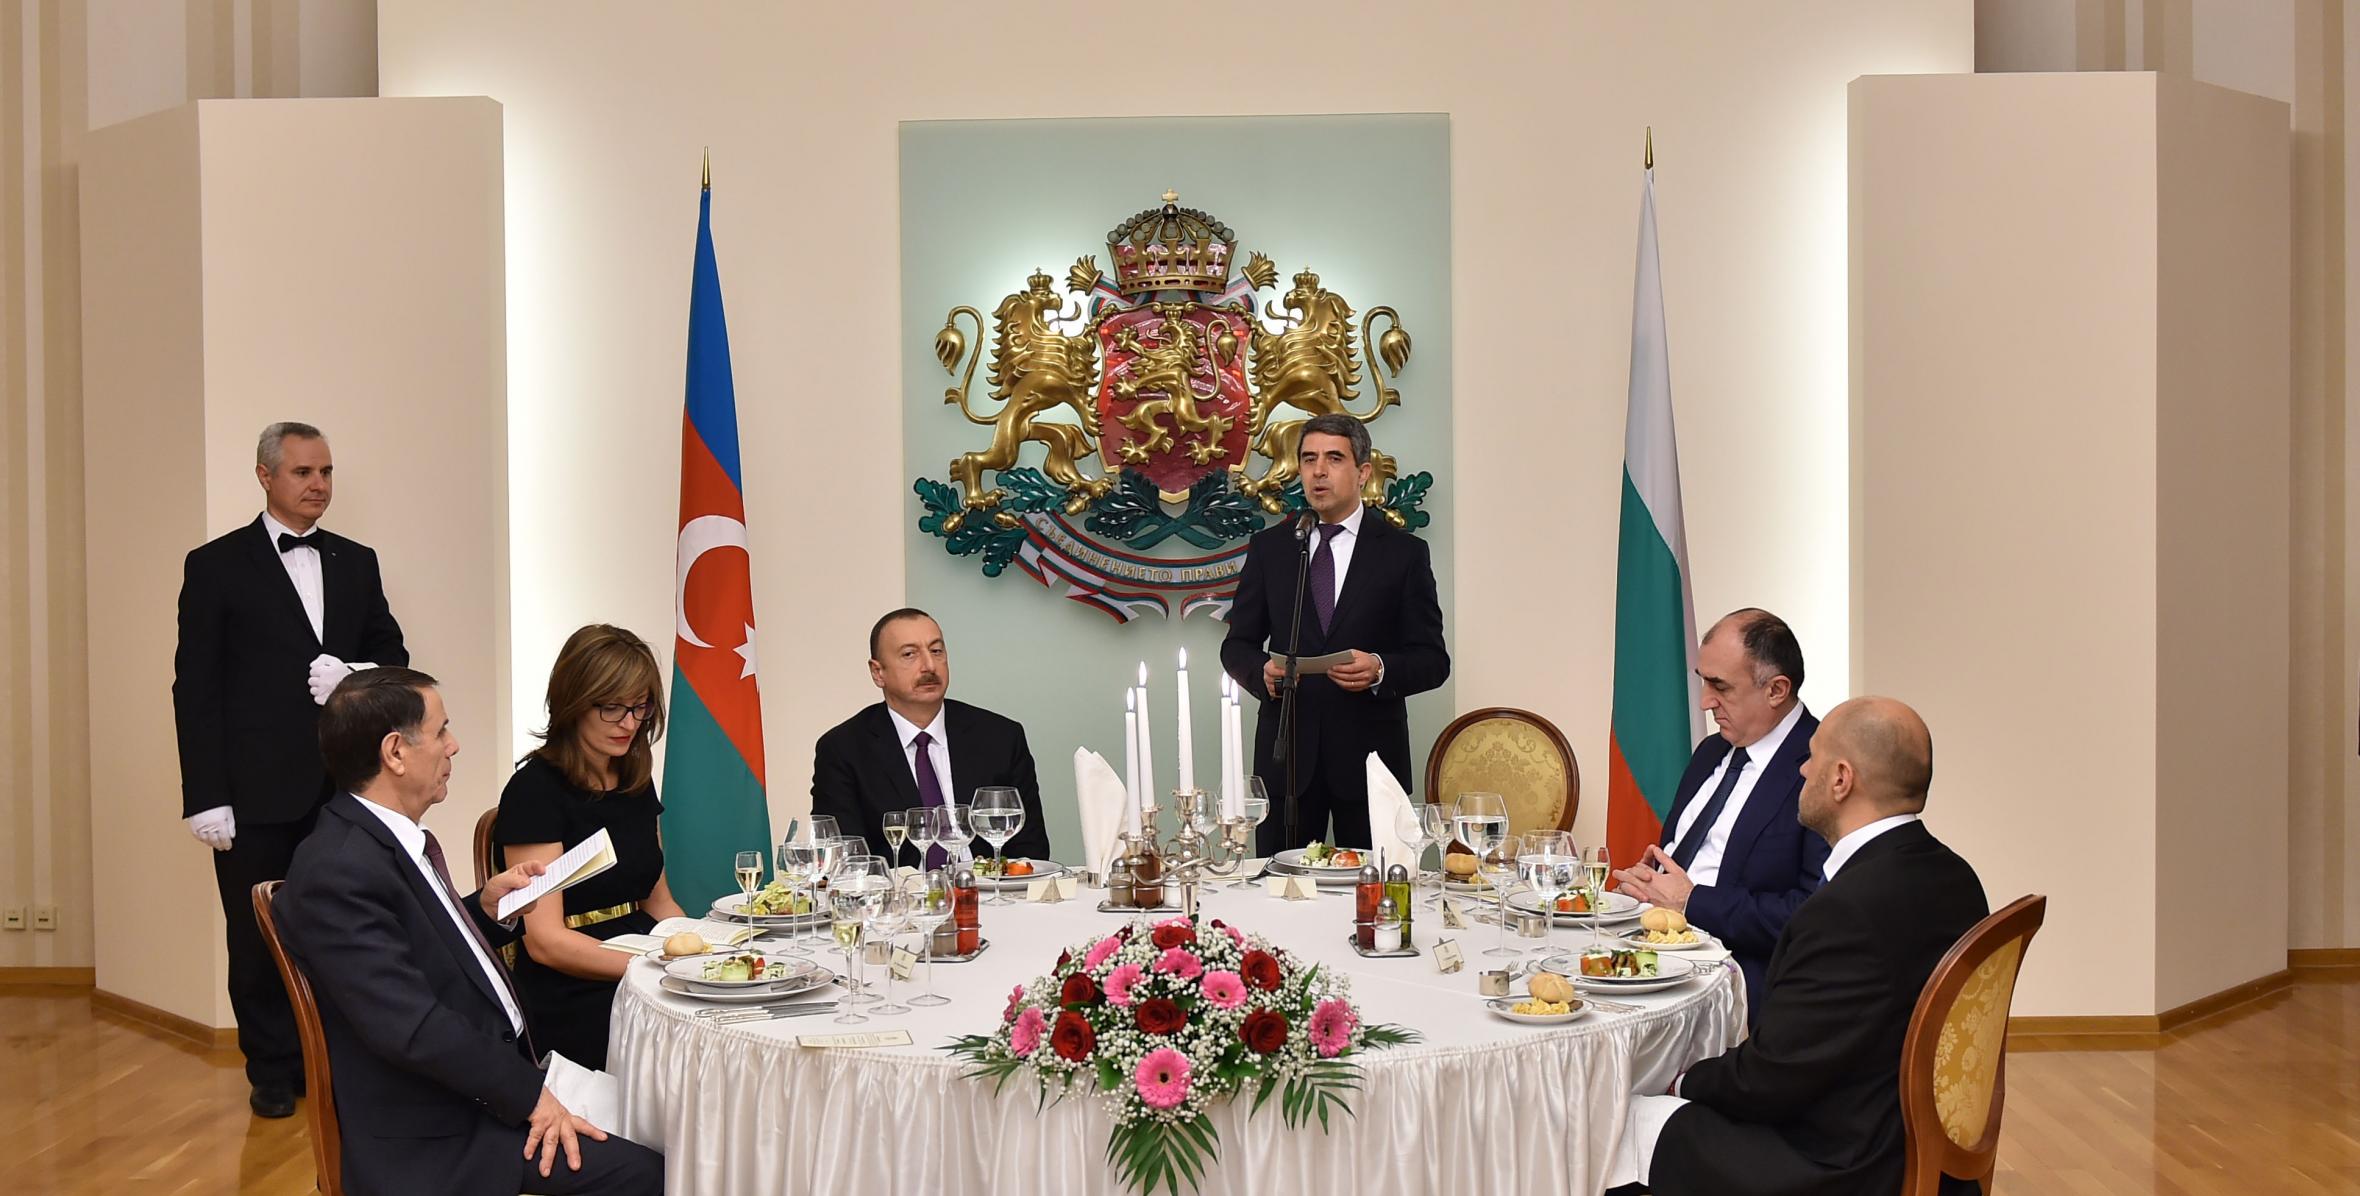 Official dinner reception was hosted on behalf of President of Bulgaria Rosen Plevneliev in honor of Ilham Aliyev